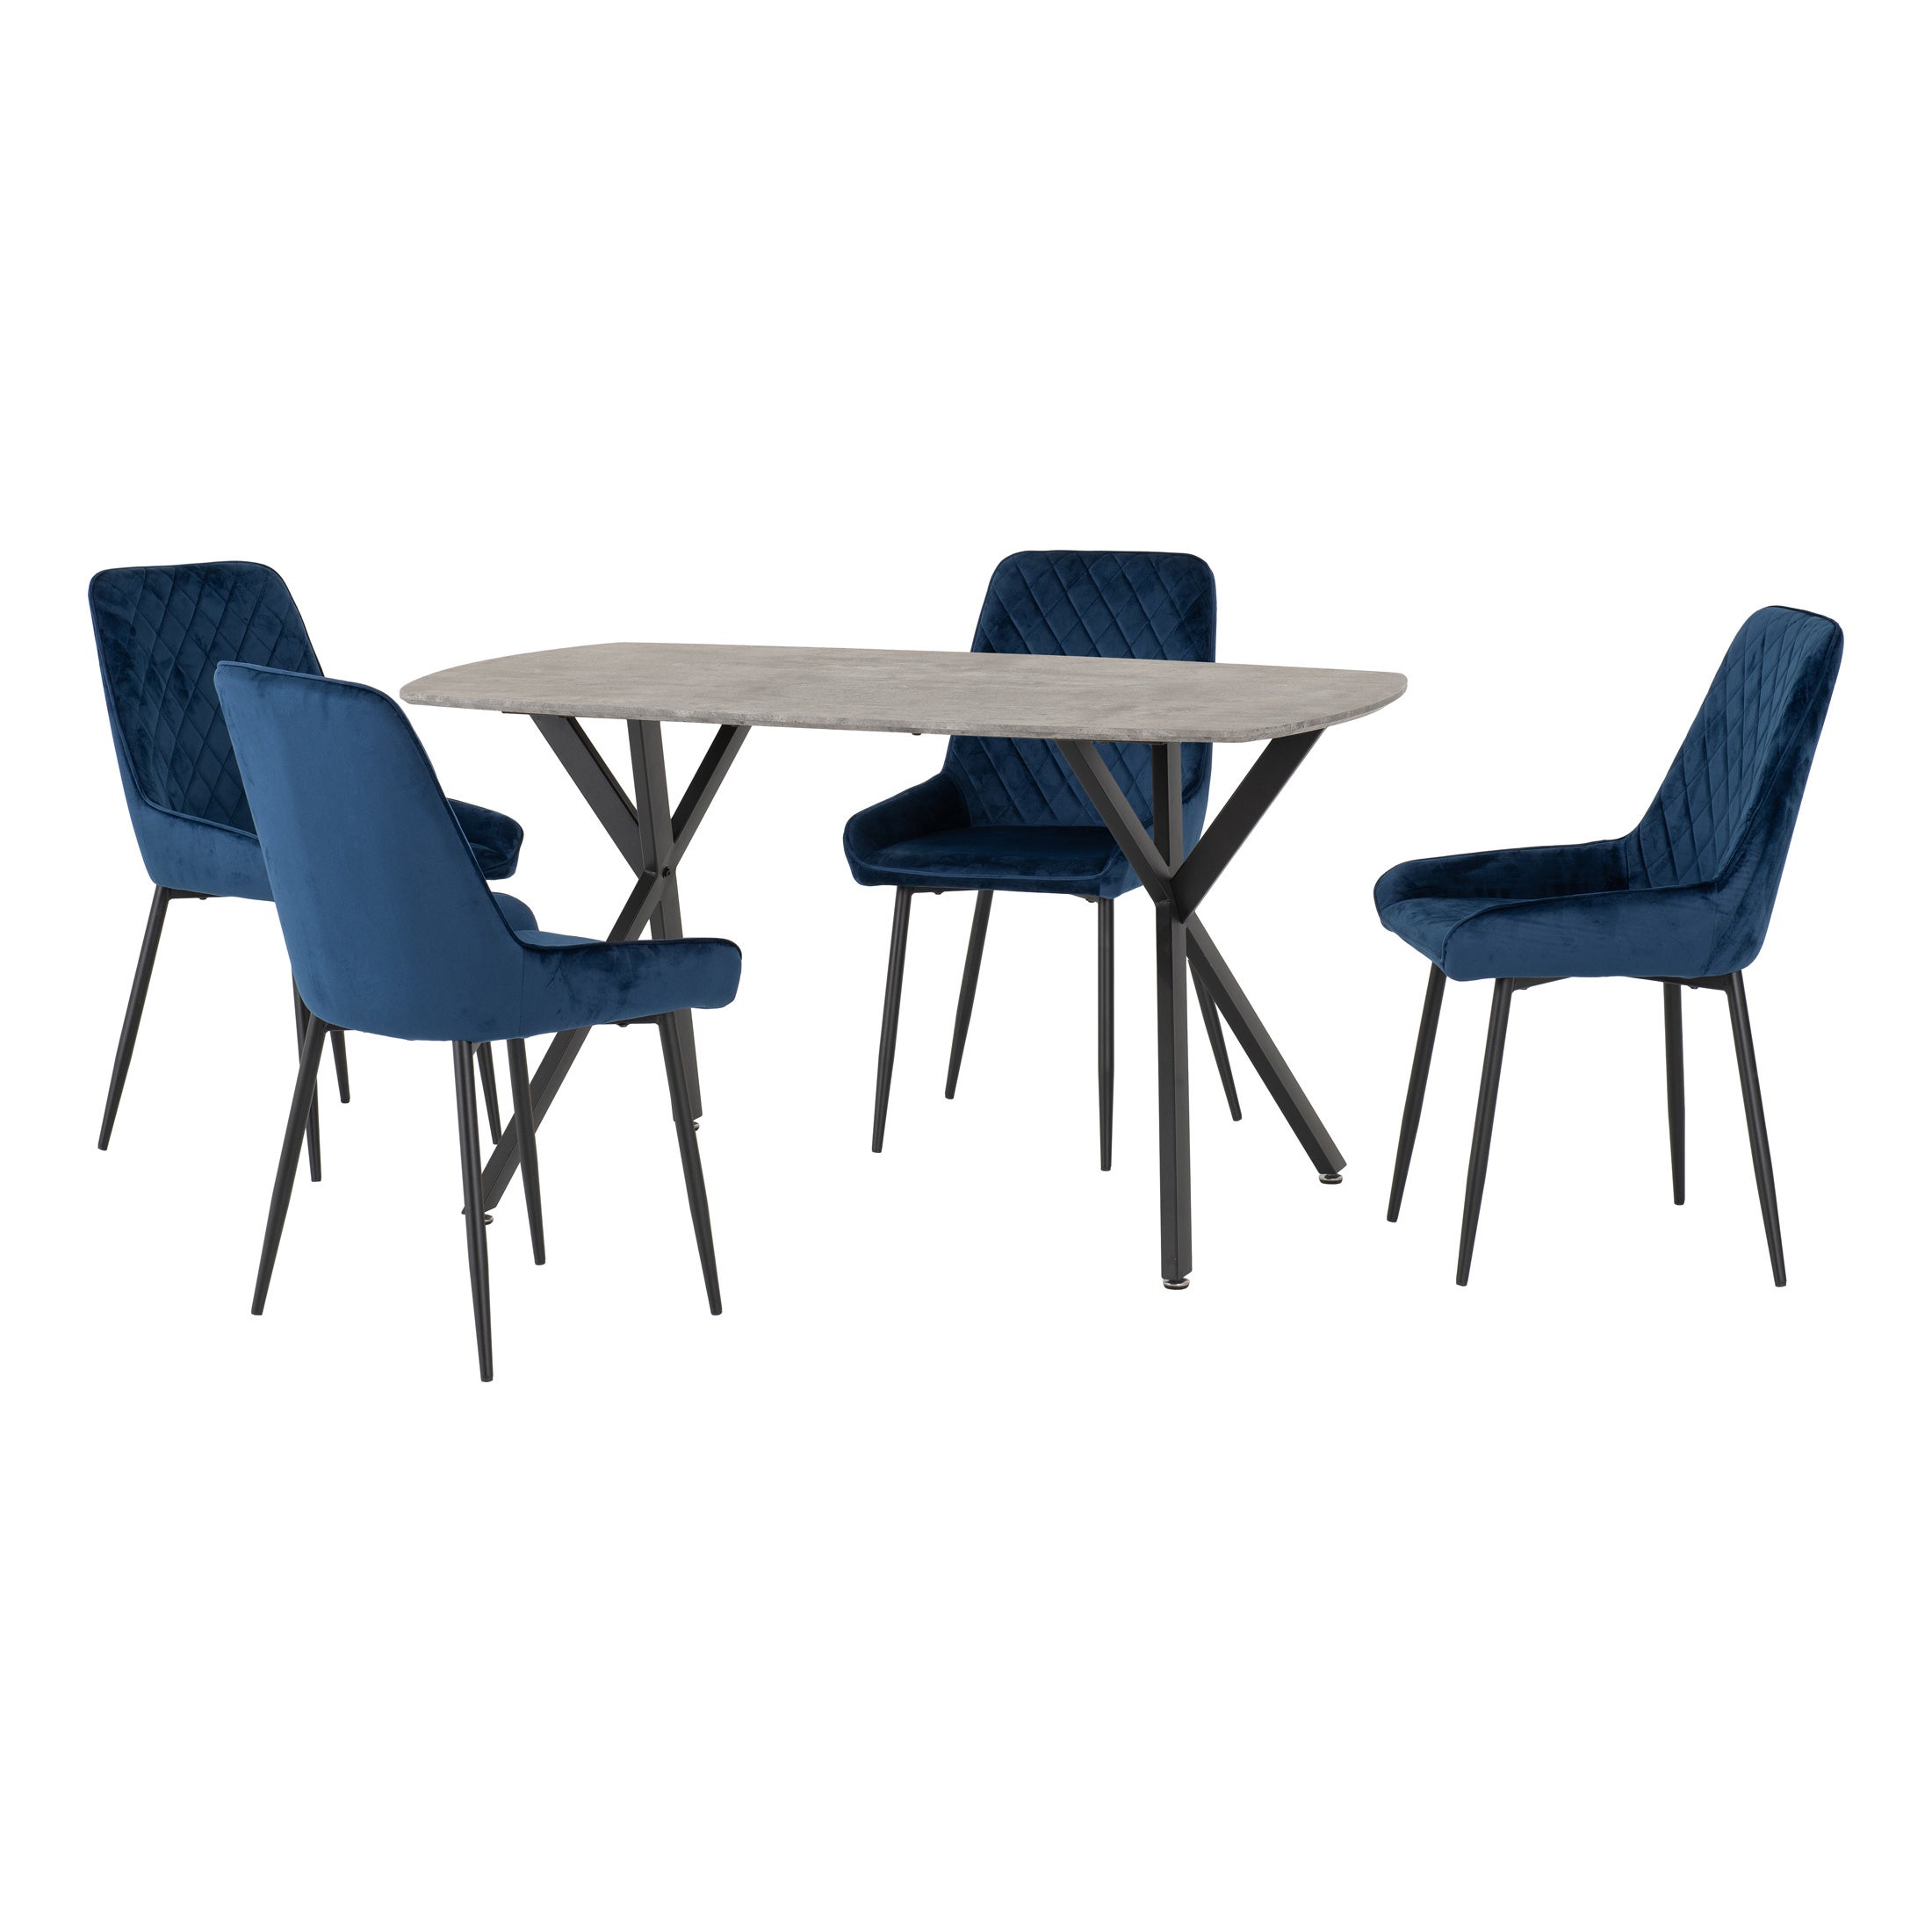 Athens Rectangular Dining Table With 4 Avery Chairs Concrete Effect Navy Blue